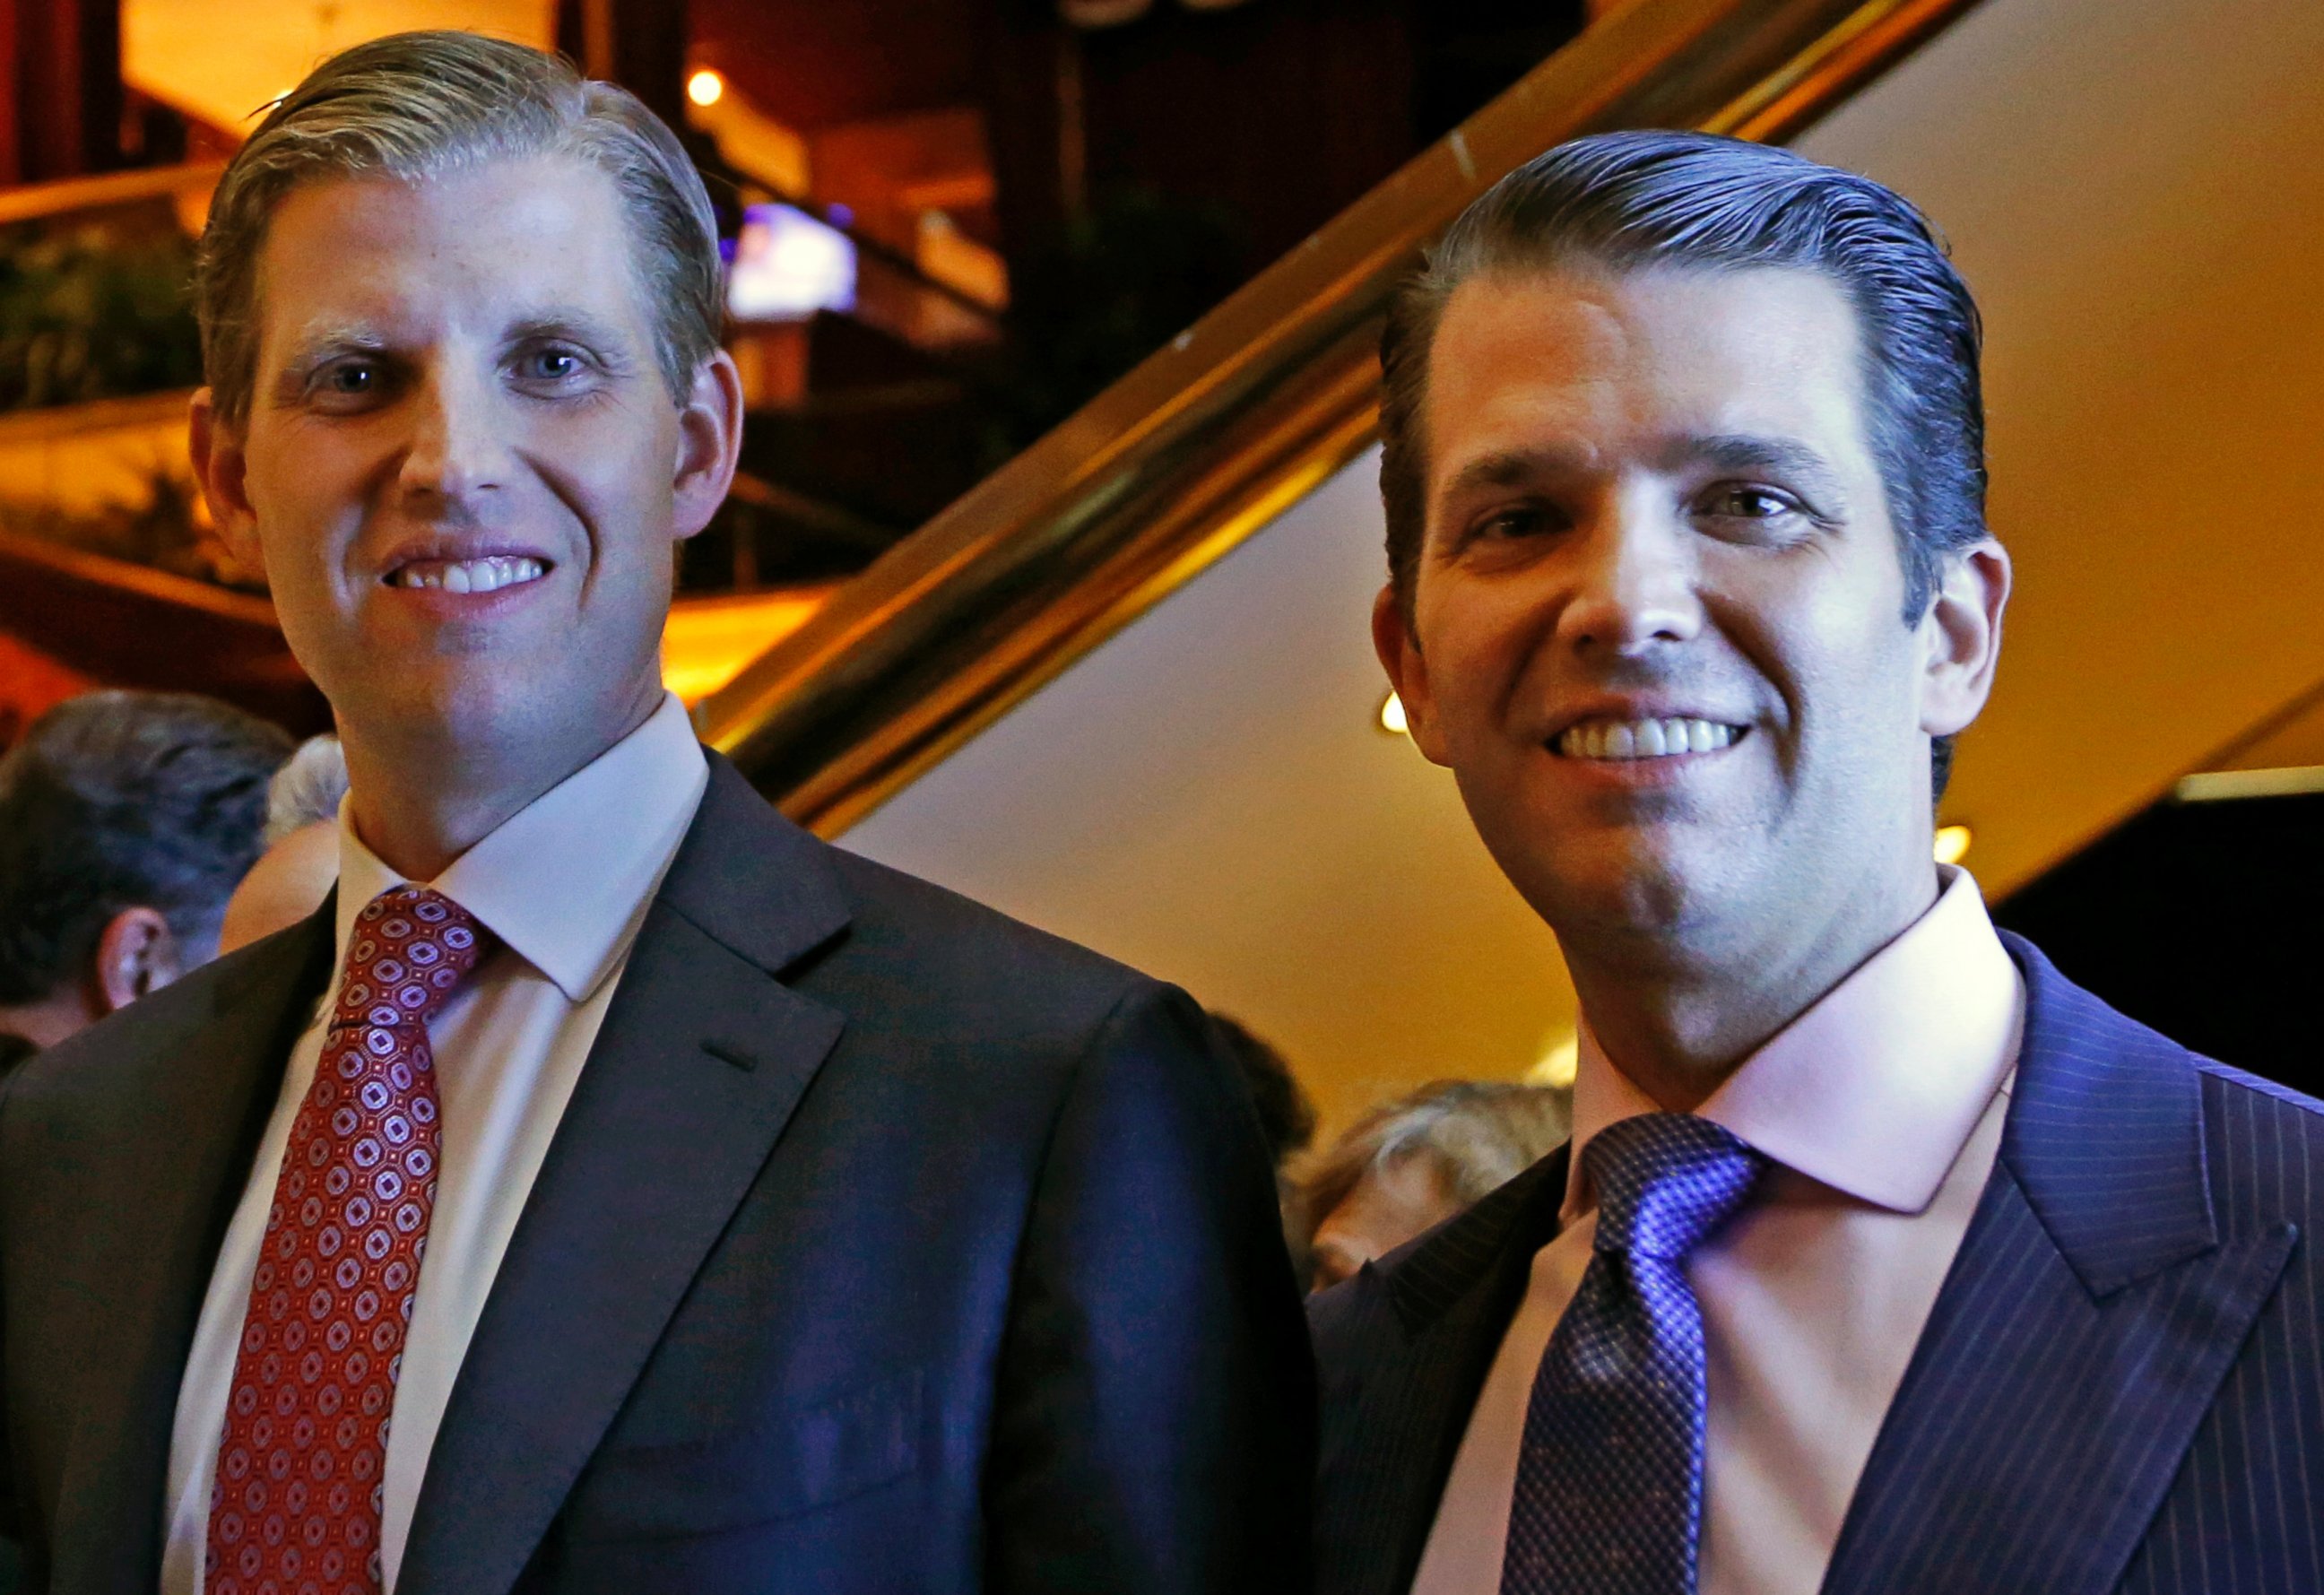 PHOTO: Eric Trump and Donald Trump Jr., executive vice presidents of The Trump Organization, pose for a photograph at an event for Scion Hotels, a division of Trump Hotels, June 5, 2017, in New York. 